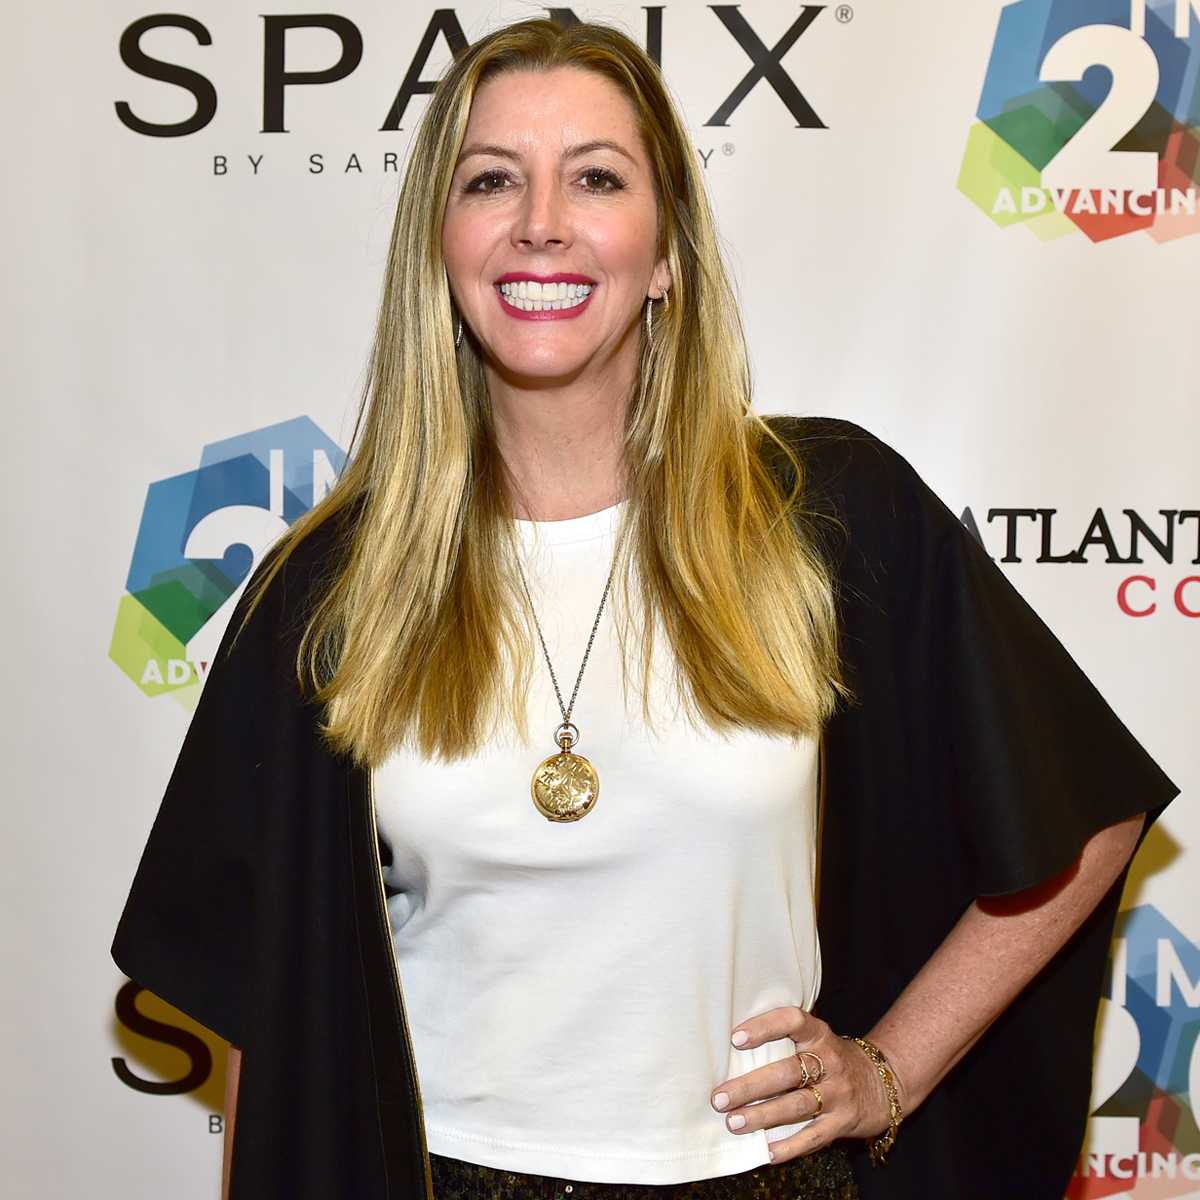 SPANX - Sara Blakely's version of the #HowItStarted